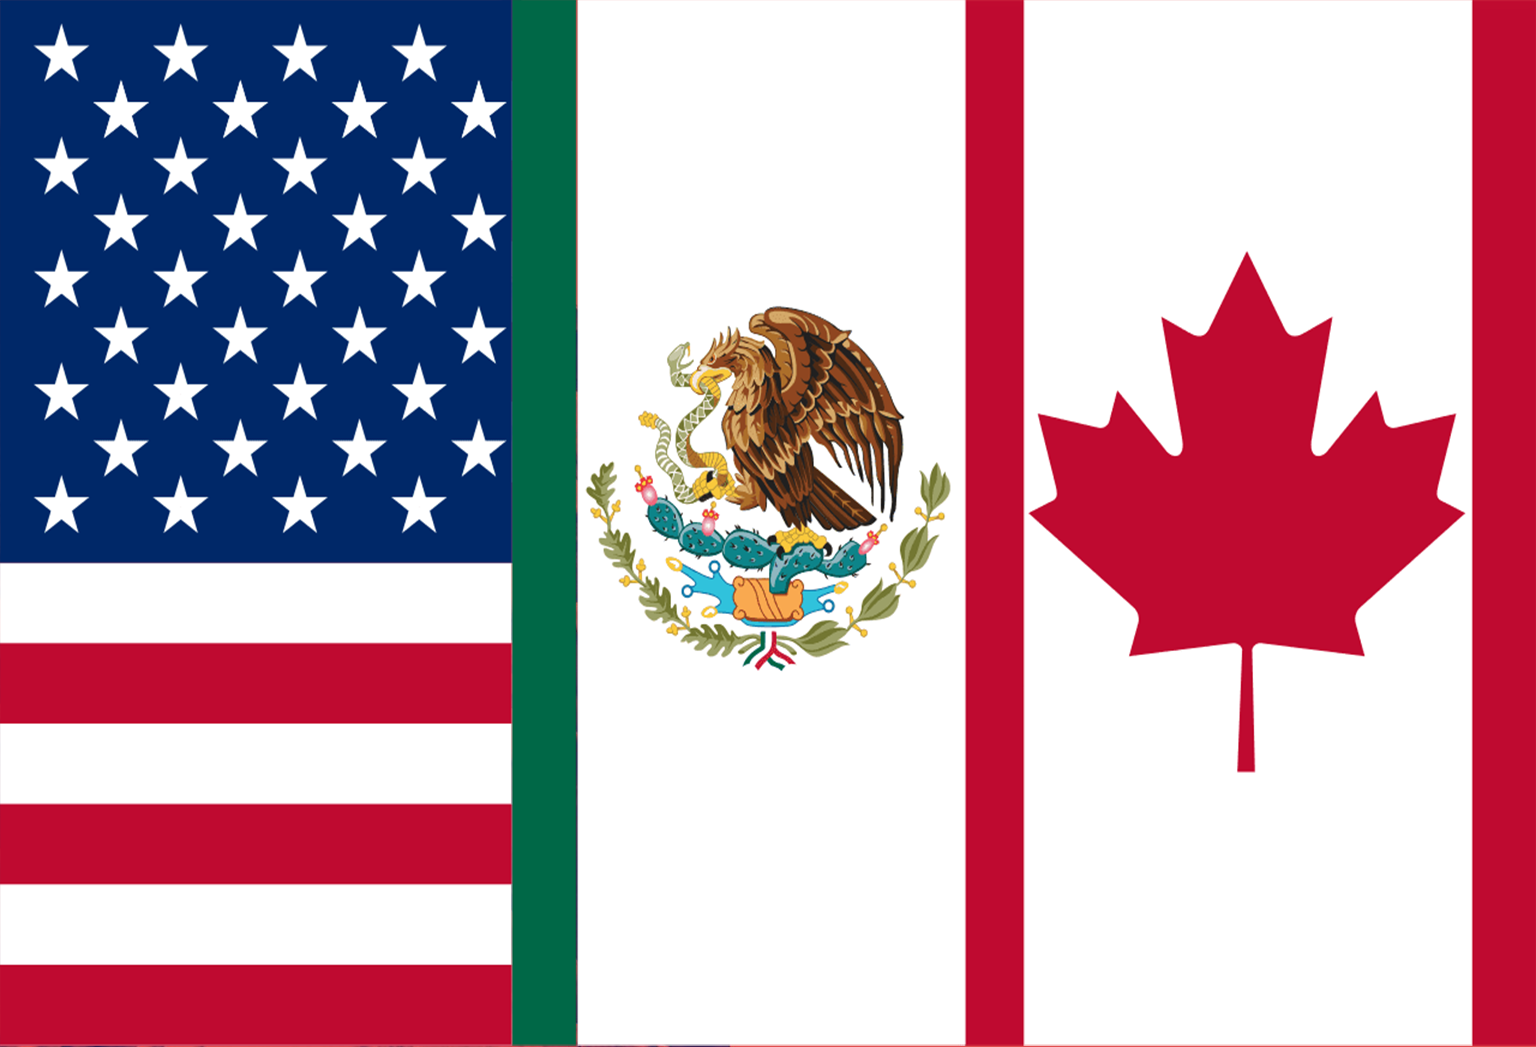 Flags of the US, Mexico, and Canada displayed together.